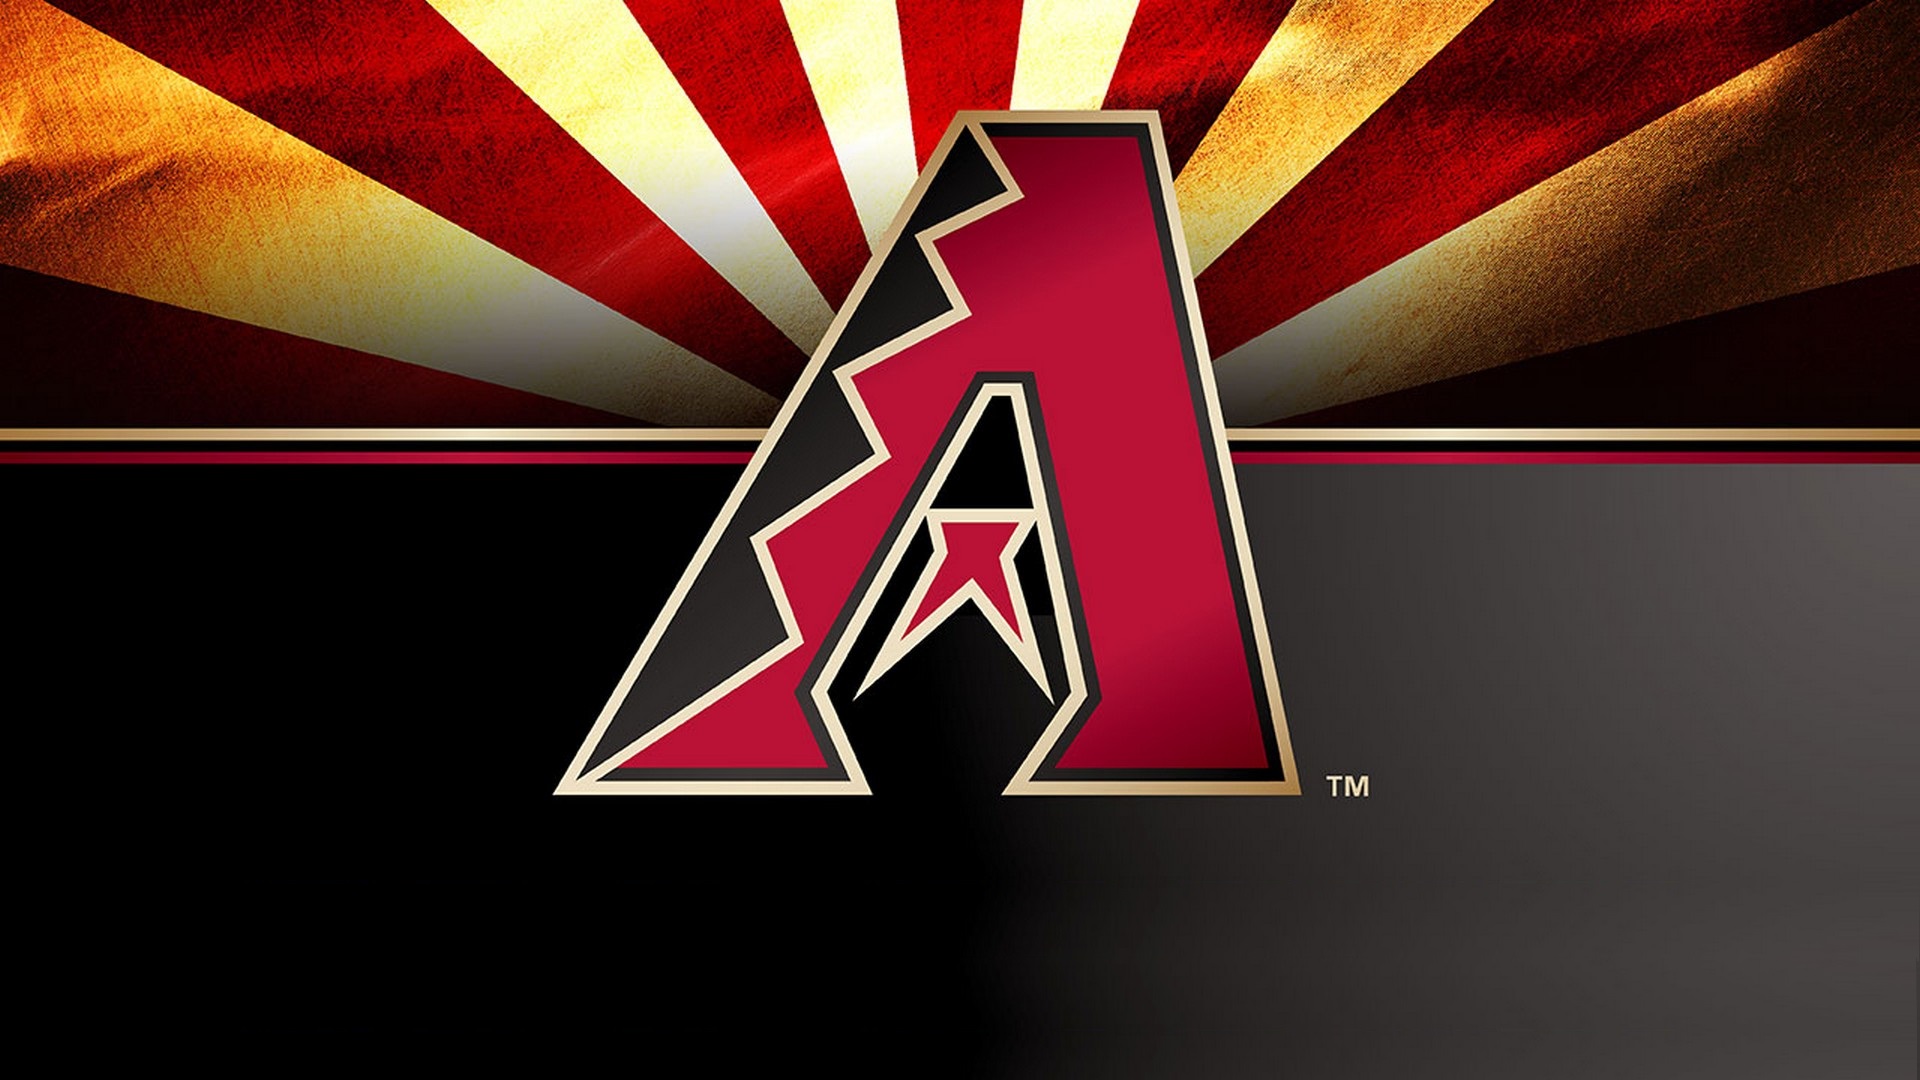 Arizona Diamondbacks MLB Laptop Wallpaper with high-resolution 1920x1080 pixel. You can use this wallpaper for Mac Desktop Wallpaper, Laptop Screensavers, Android Wallpapers, Tablet or iPhone Home Screen and another mobile phone device